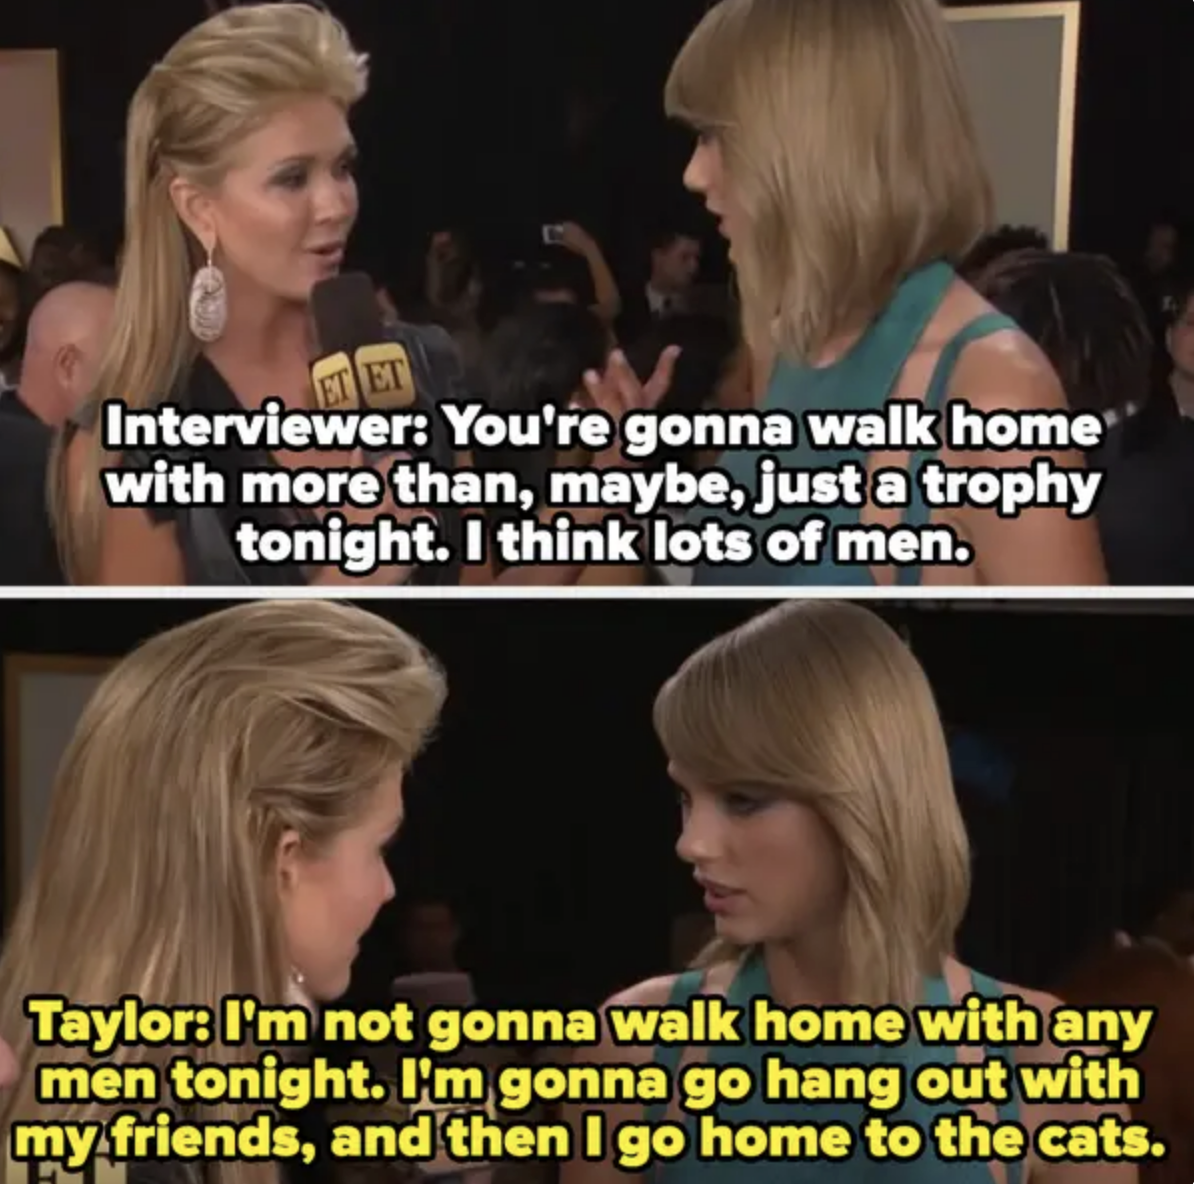 the interviewer saya Taylor&#x27;s going to walk home with lots of men, so Taylor says that she&#x27;s not, she&#x27;s going to hang out with friends then go home to the cats